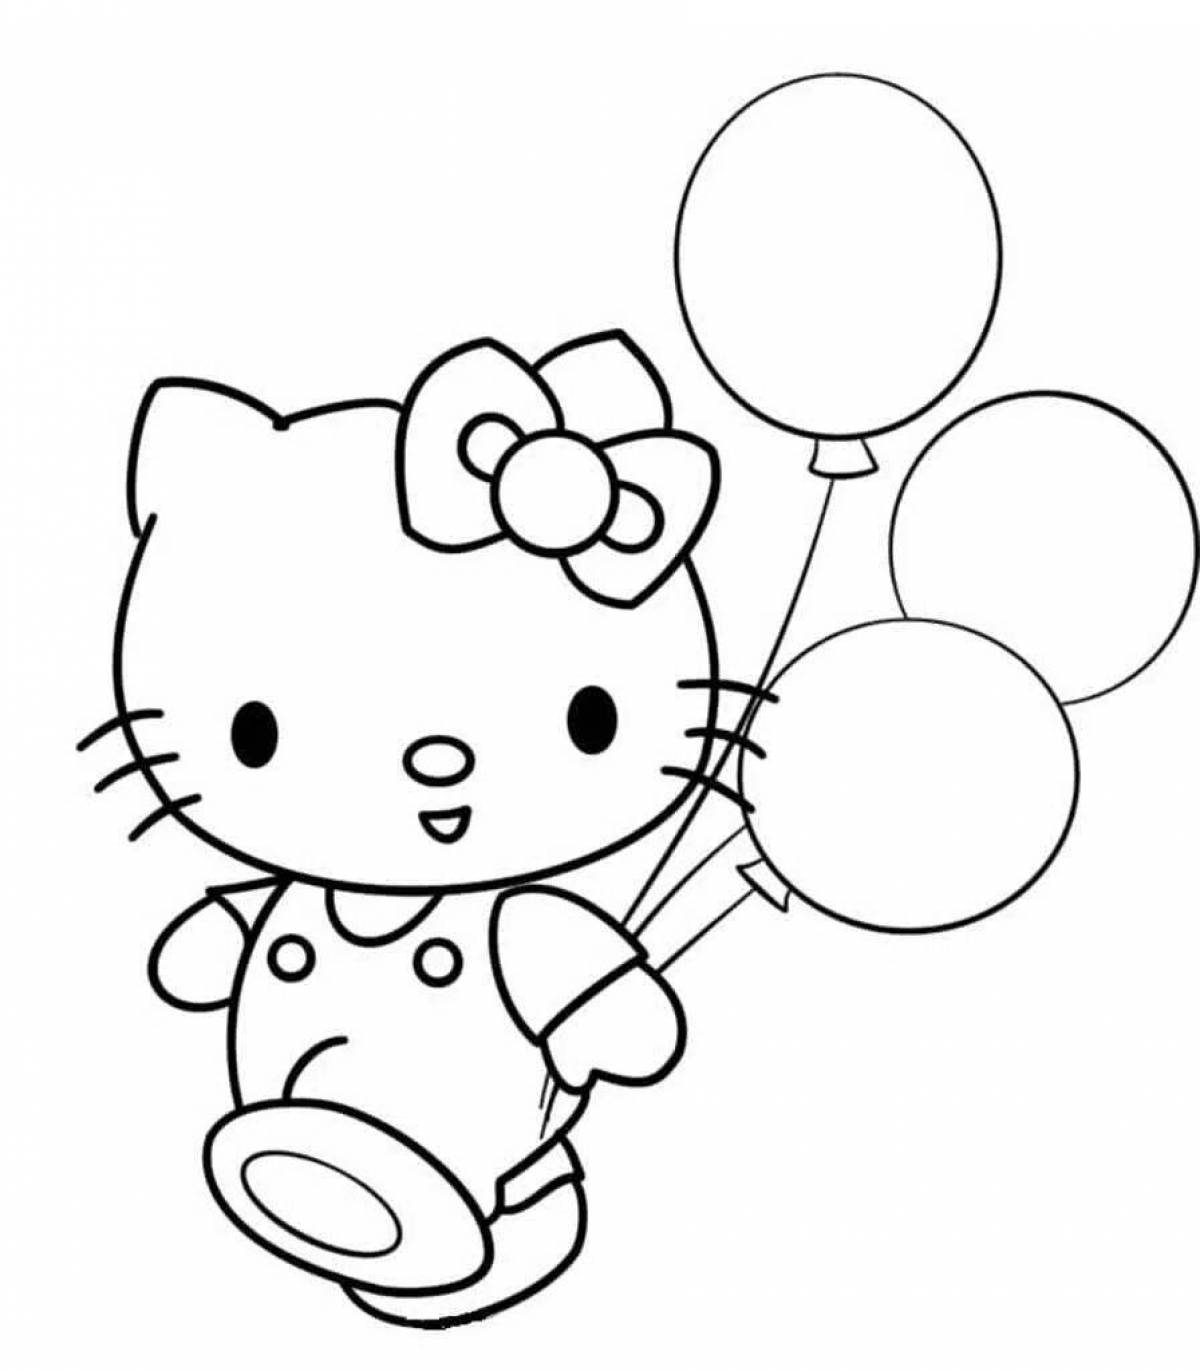 Cat with balloons #4